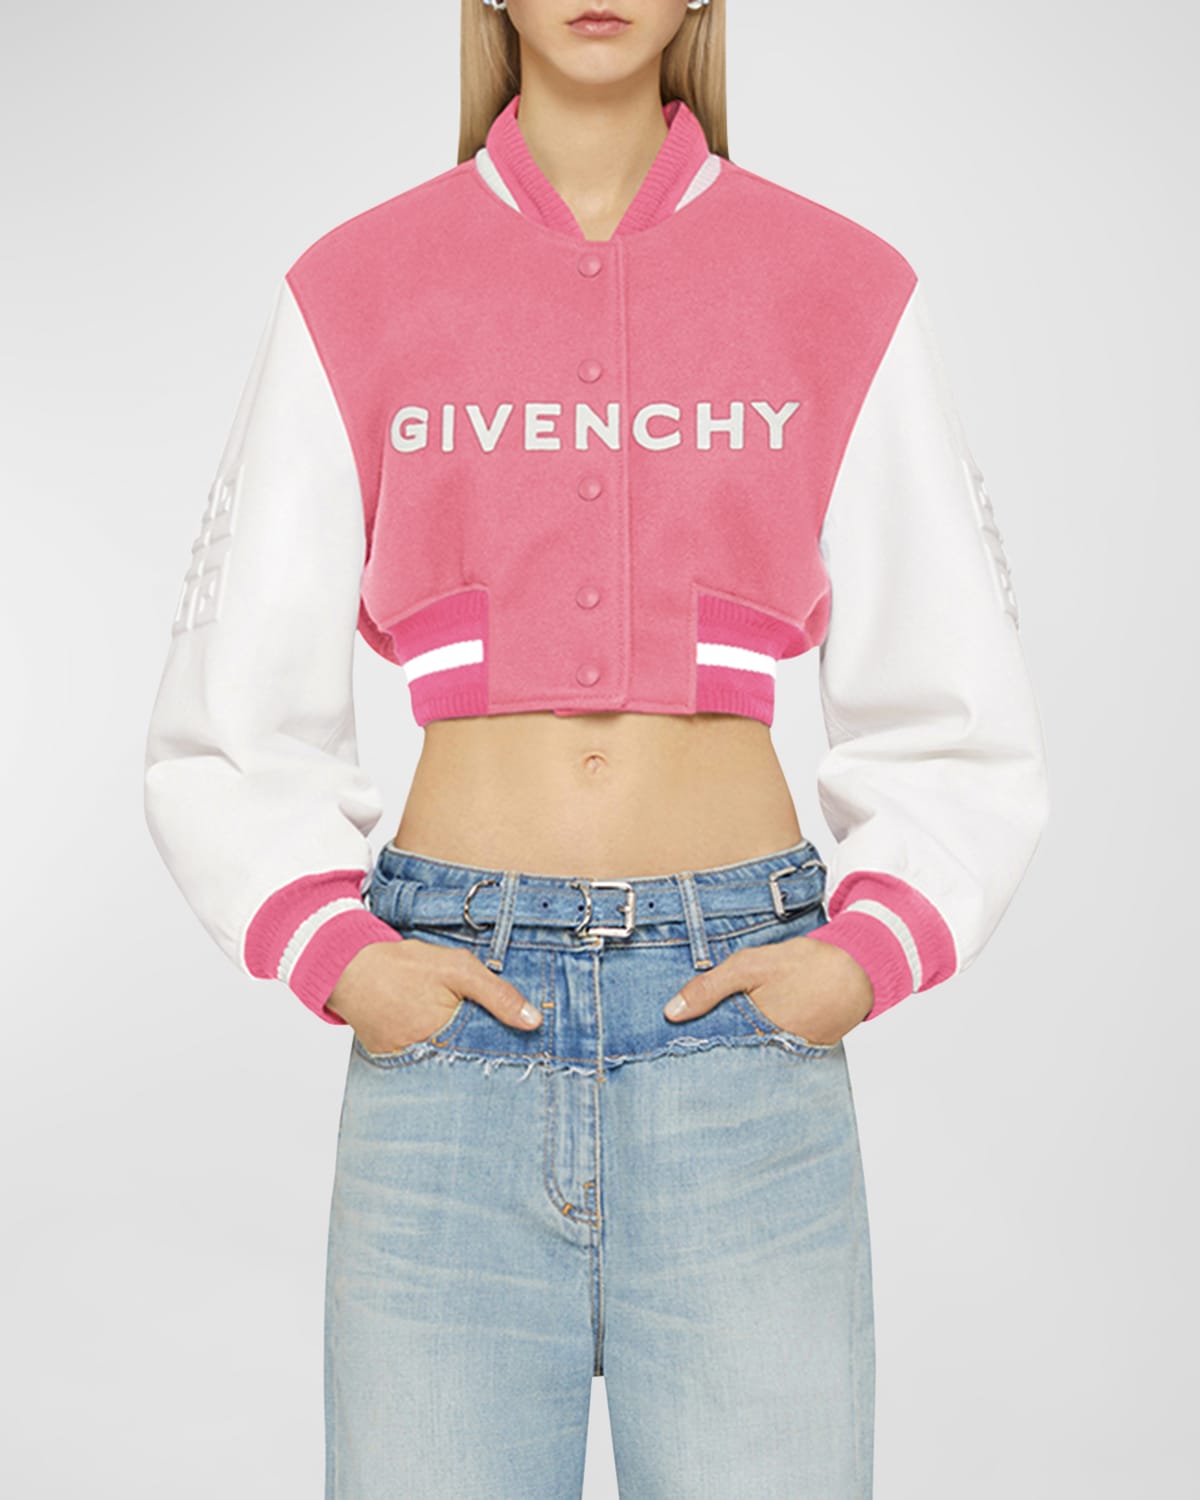 Givenchy Women's Cropped Varsity Jacket In Wool And Leather In Pink/white